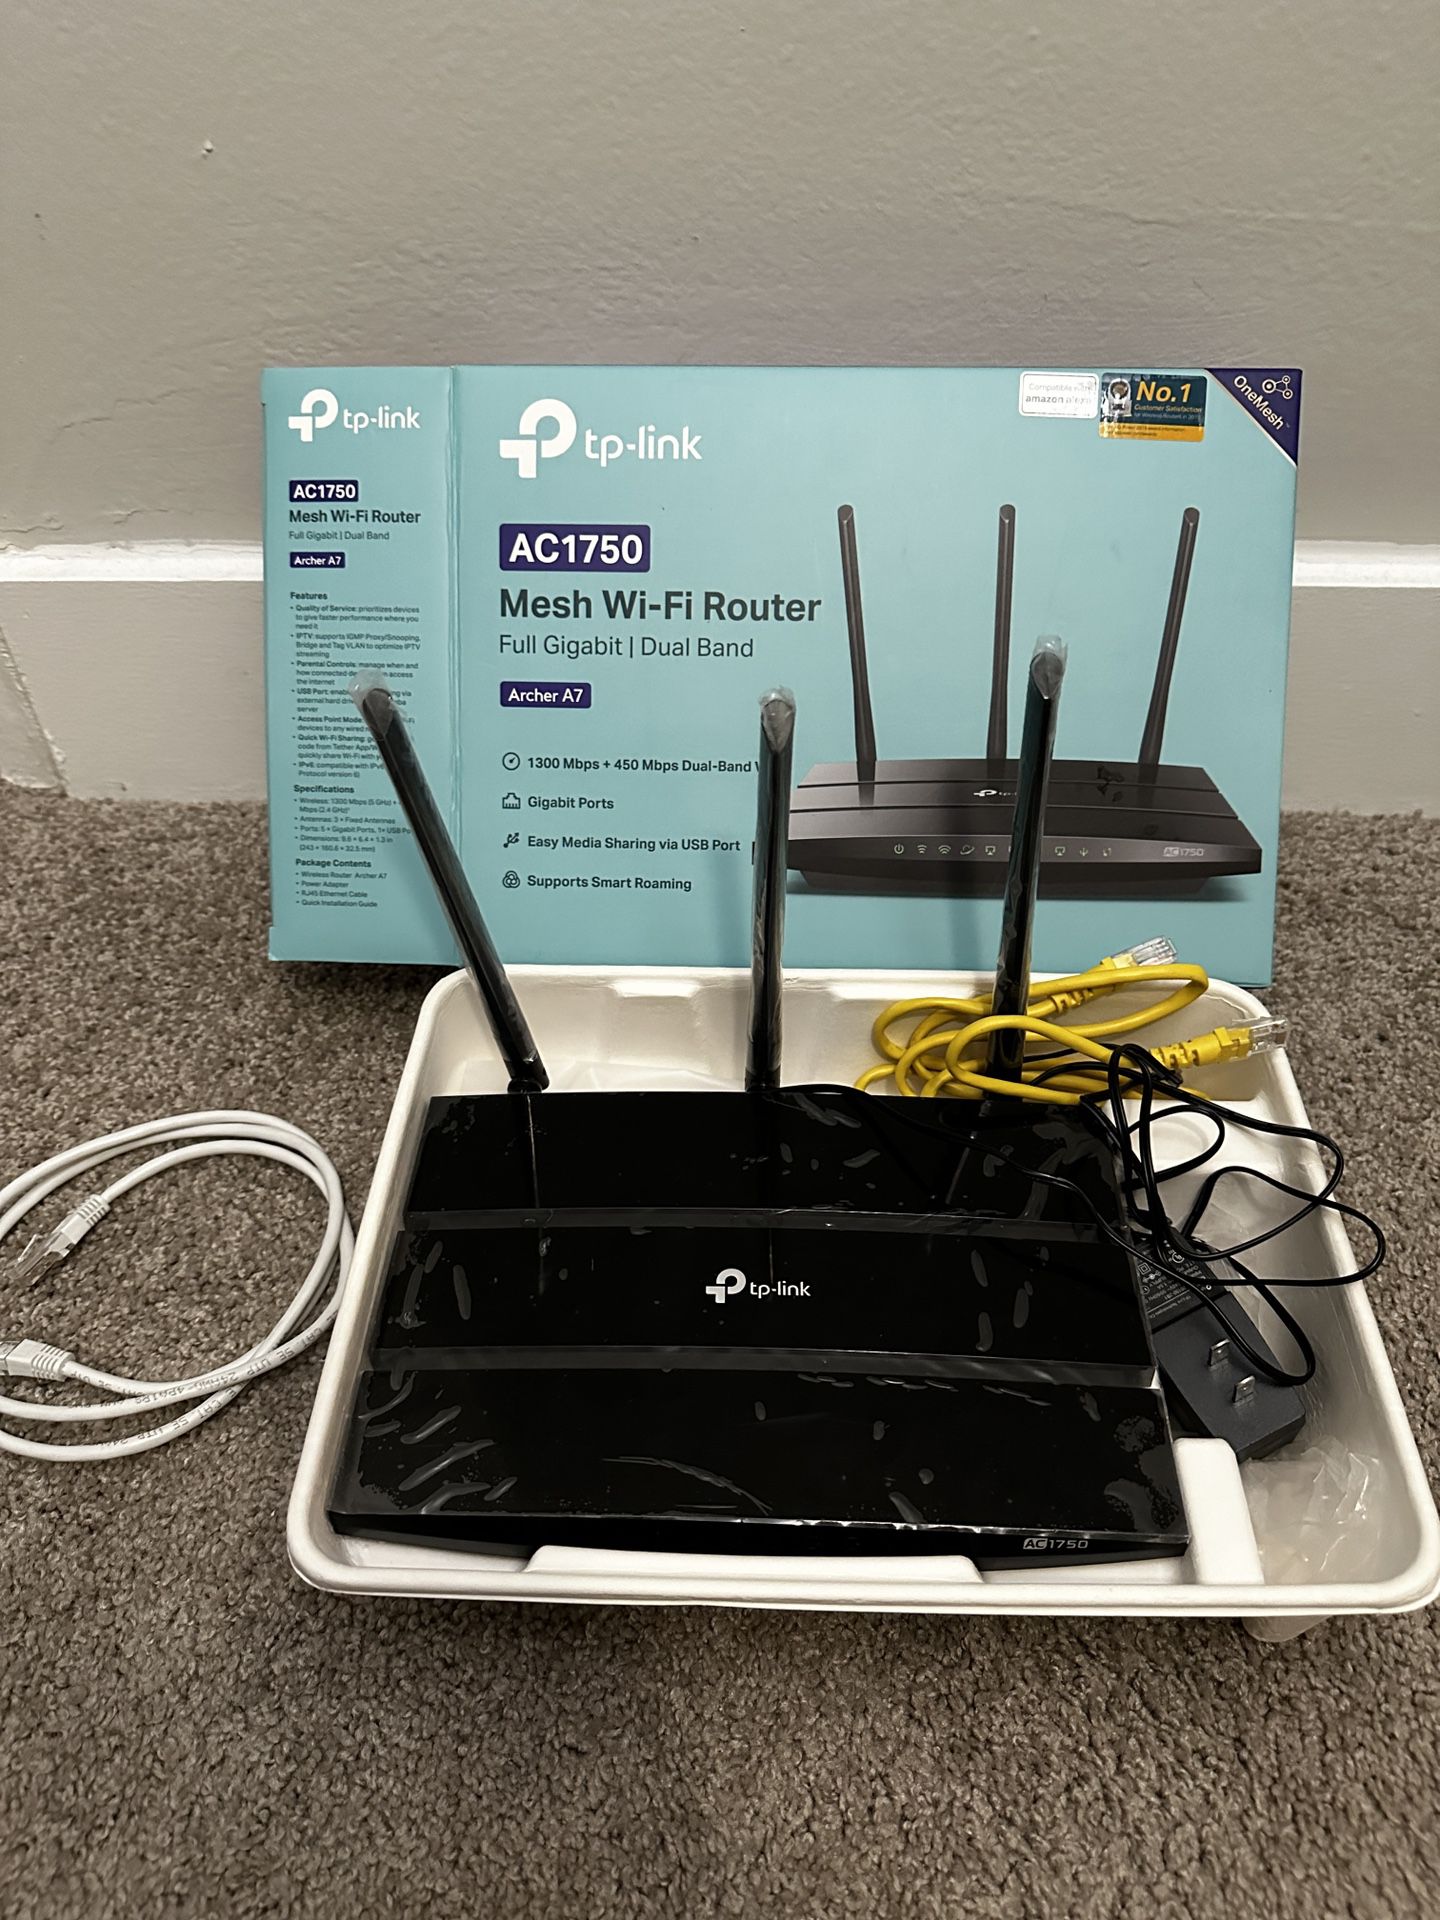 TP-Link Archer C7 AC1750 Wireless Dual Band   Router with AC/Cat 5 Grade A